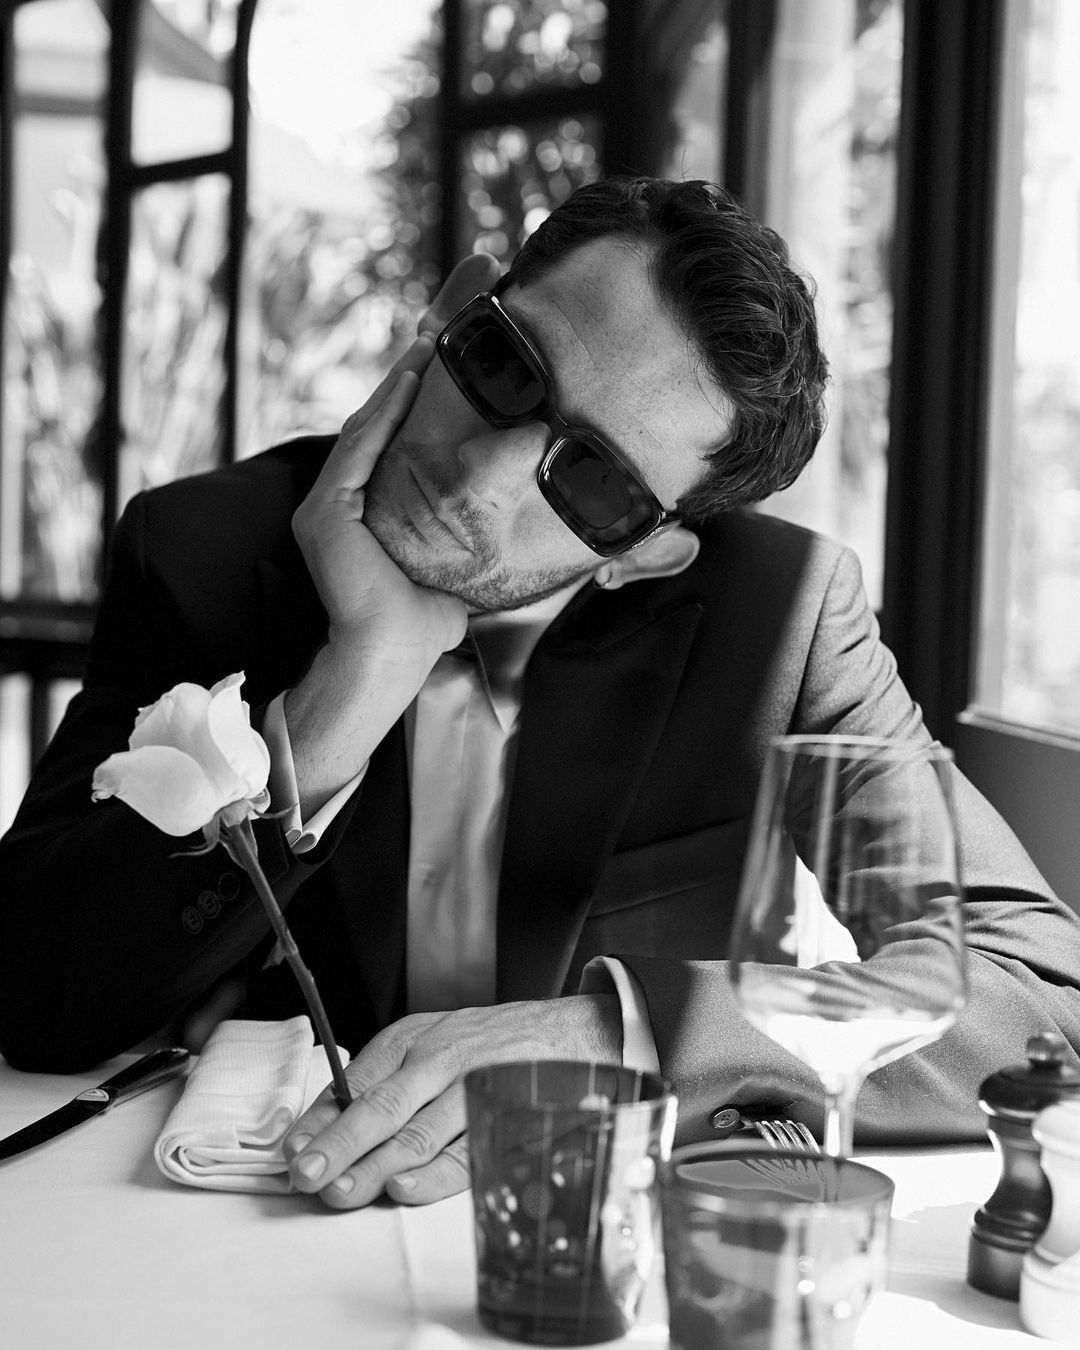 A man in a suit and sunglasses sits at a table with a flower in a wine glass. - Josh O'Connor